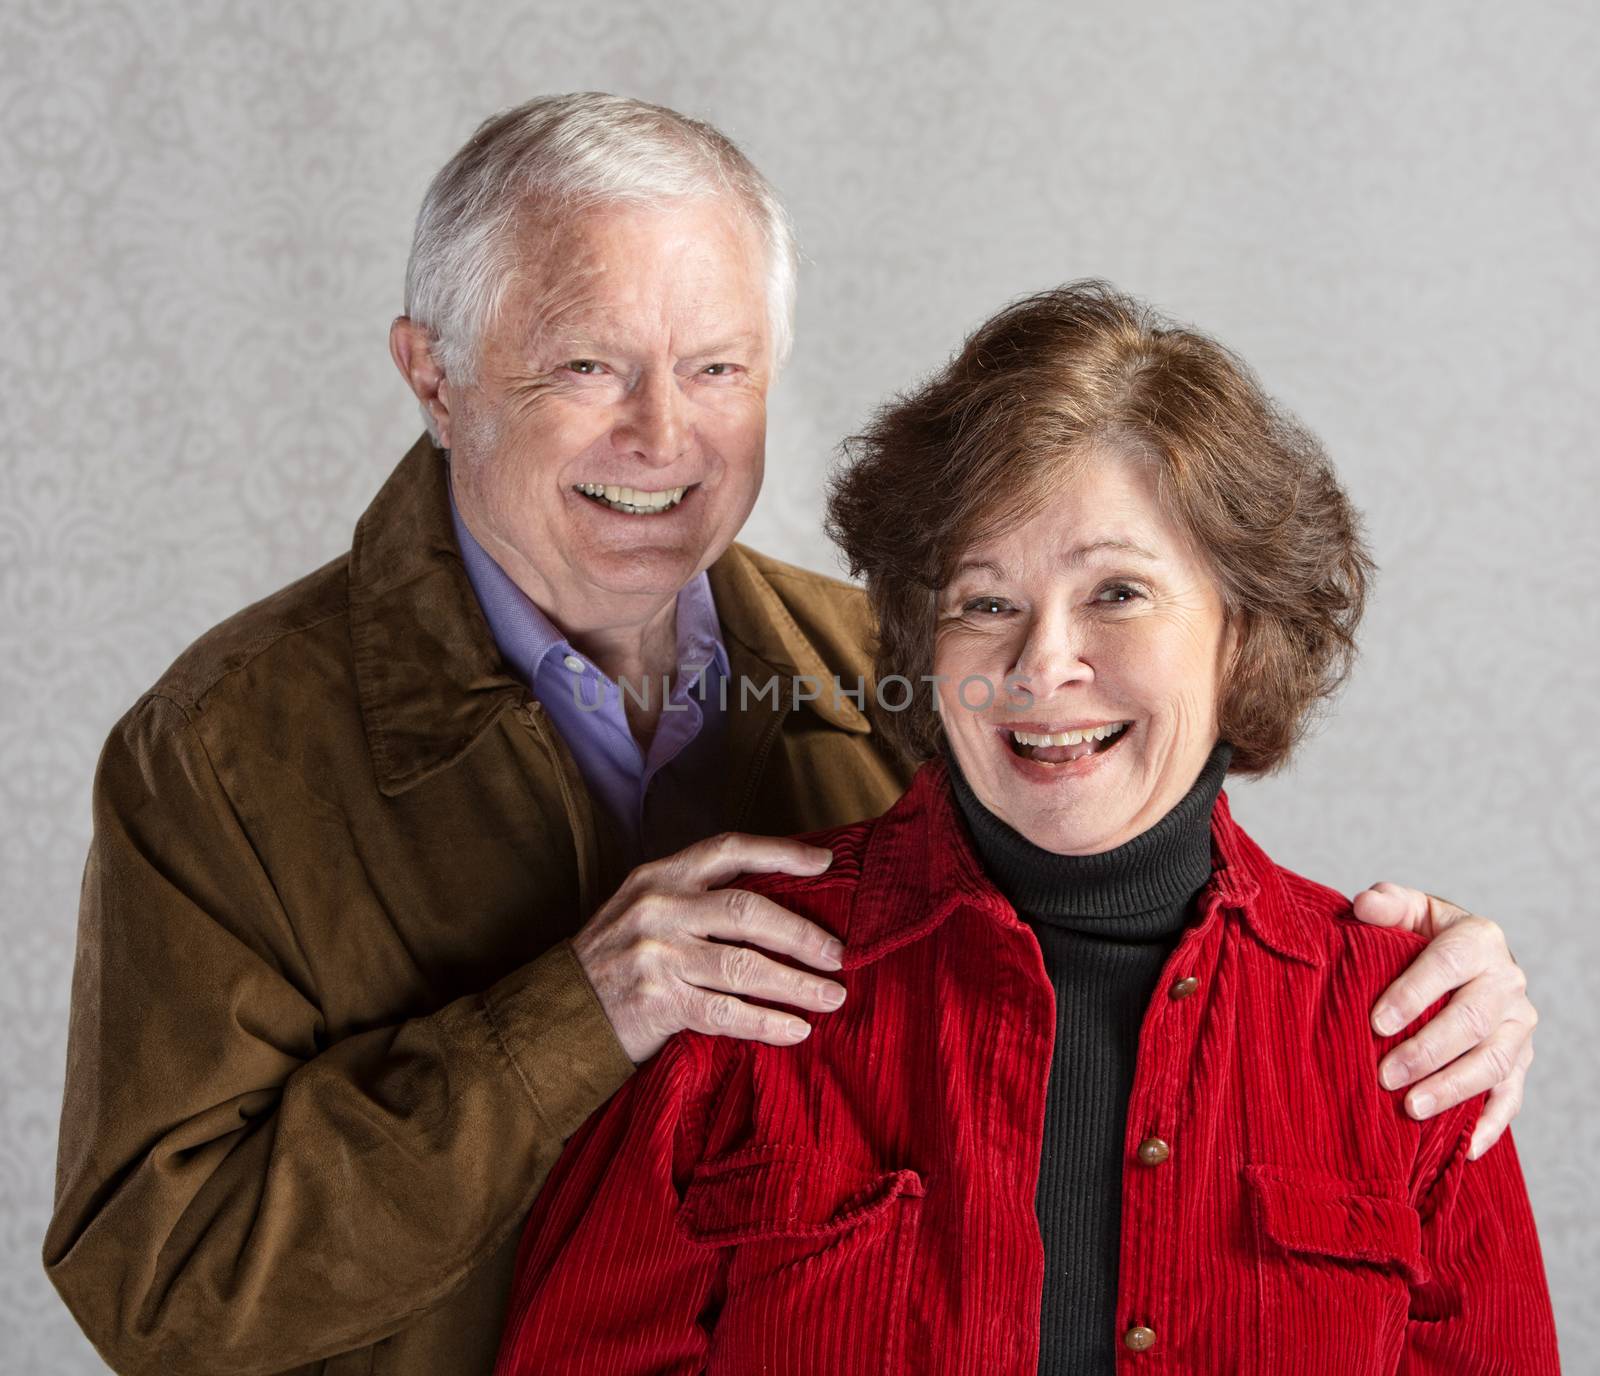 Laughing Senior Couple by Creatista